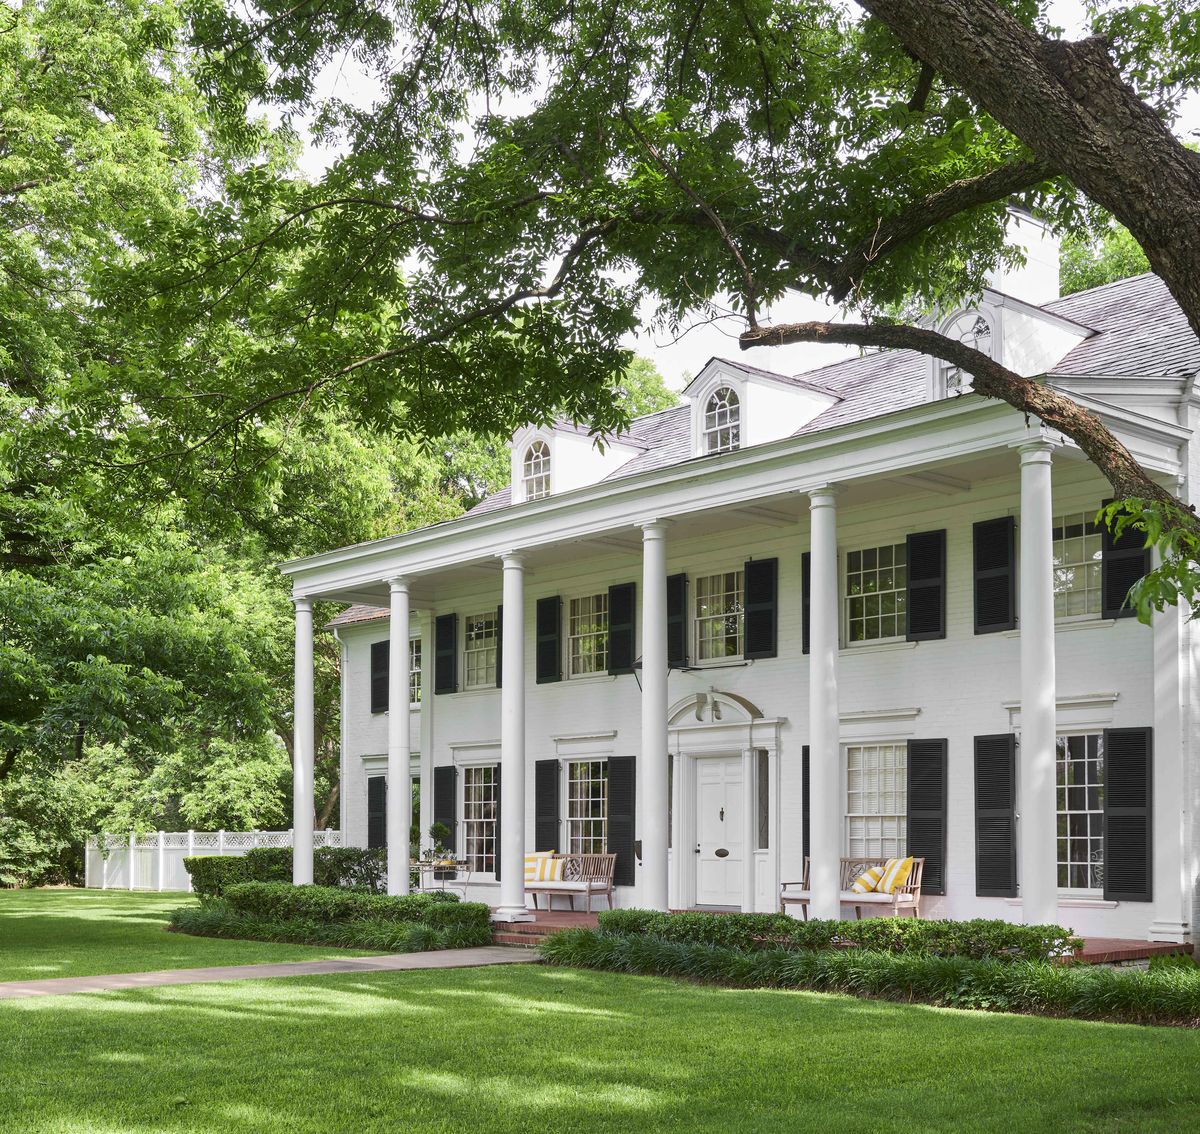 a three story white colonial home was designed by noted architect